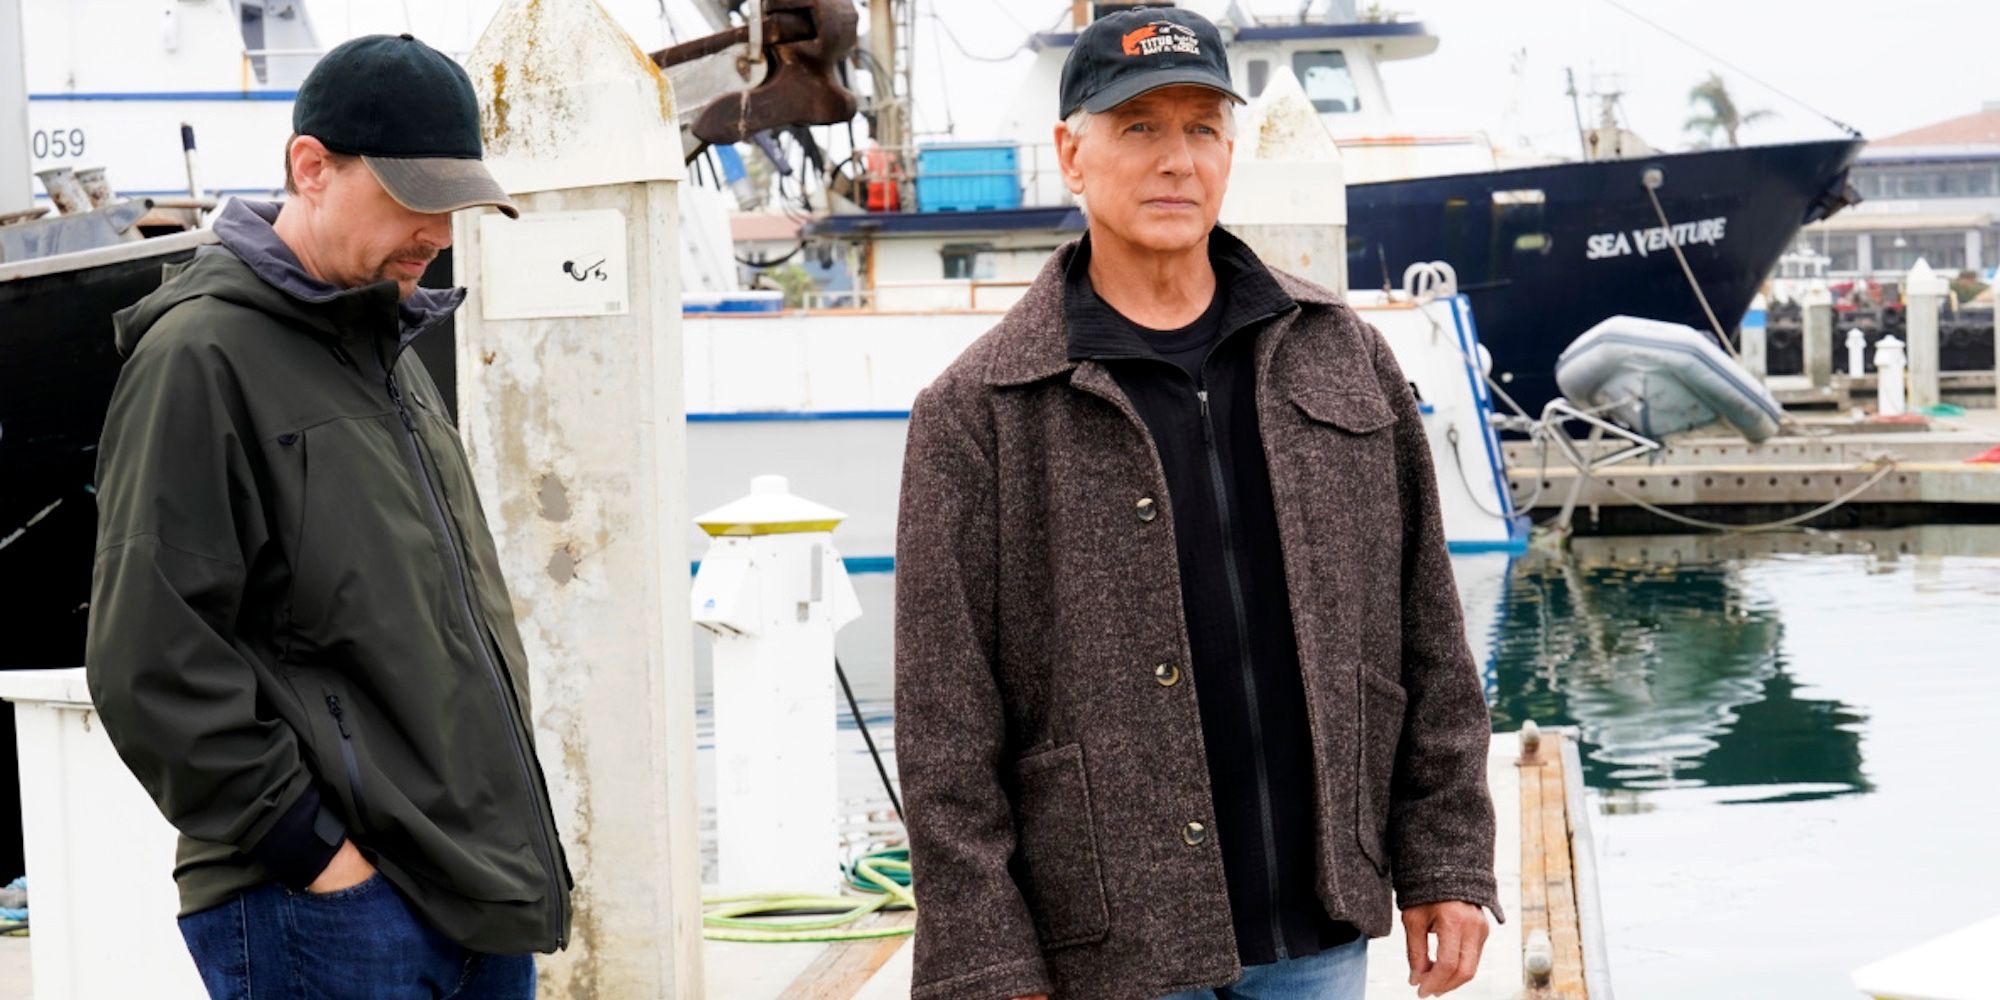 McGee standing behind Gibbs while they both wear jackets and caps at a marina in NCIS